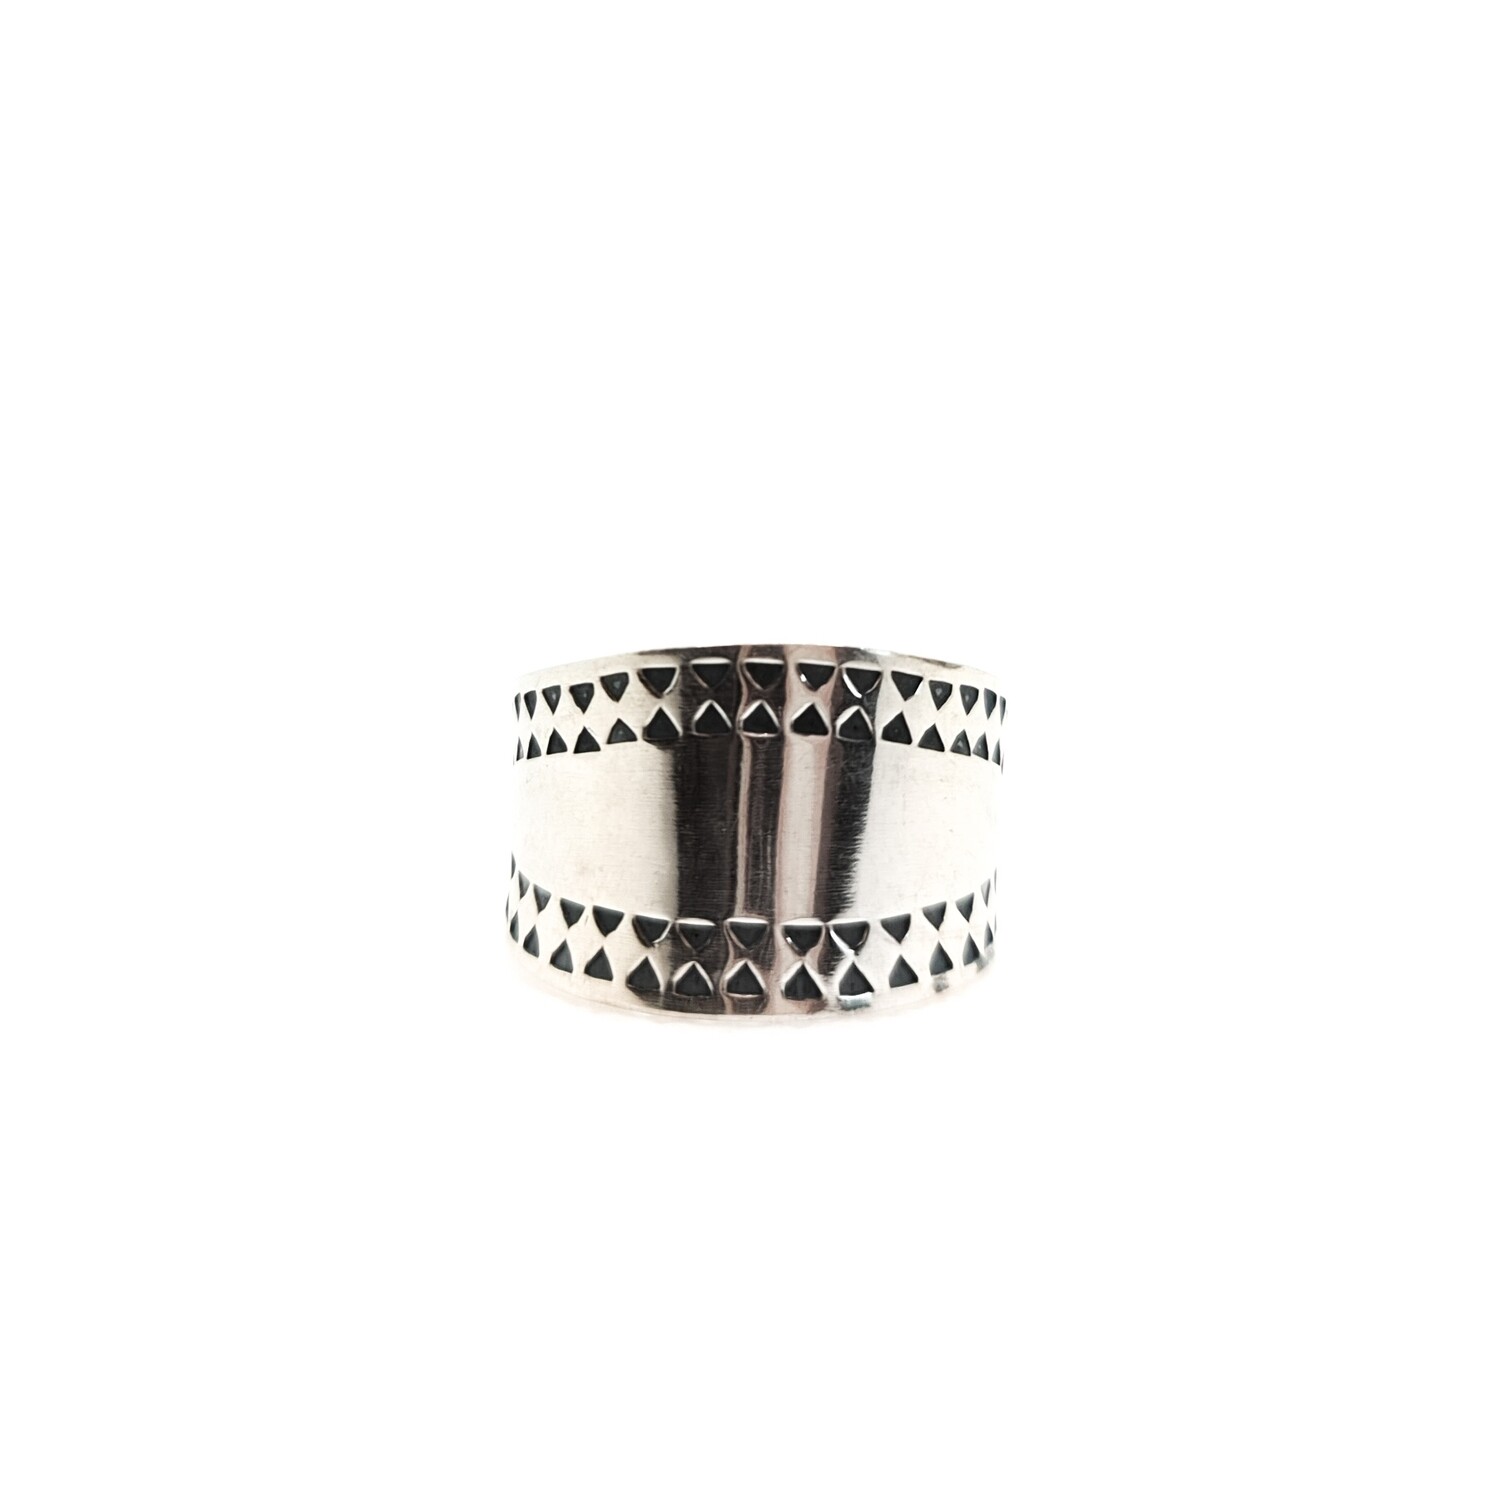 Stamped ring, small